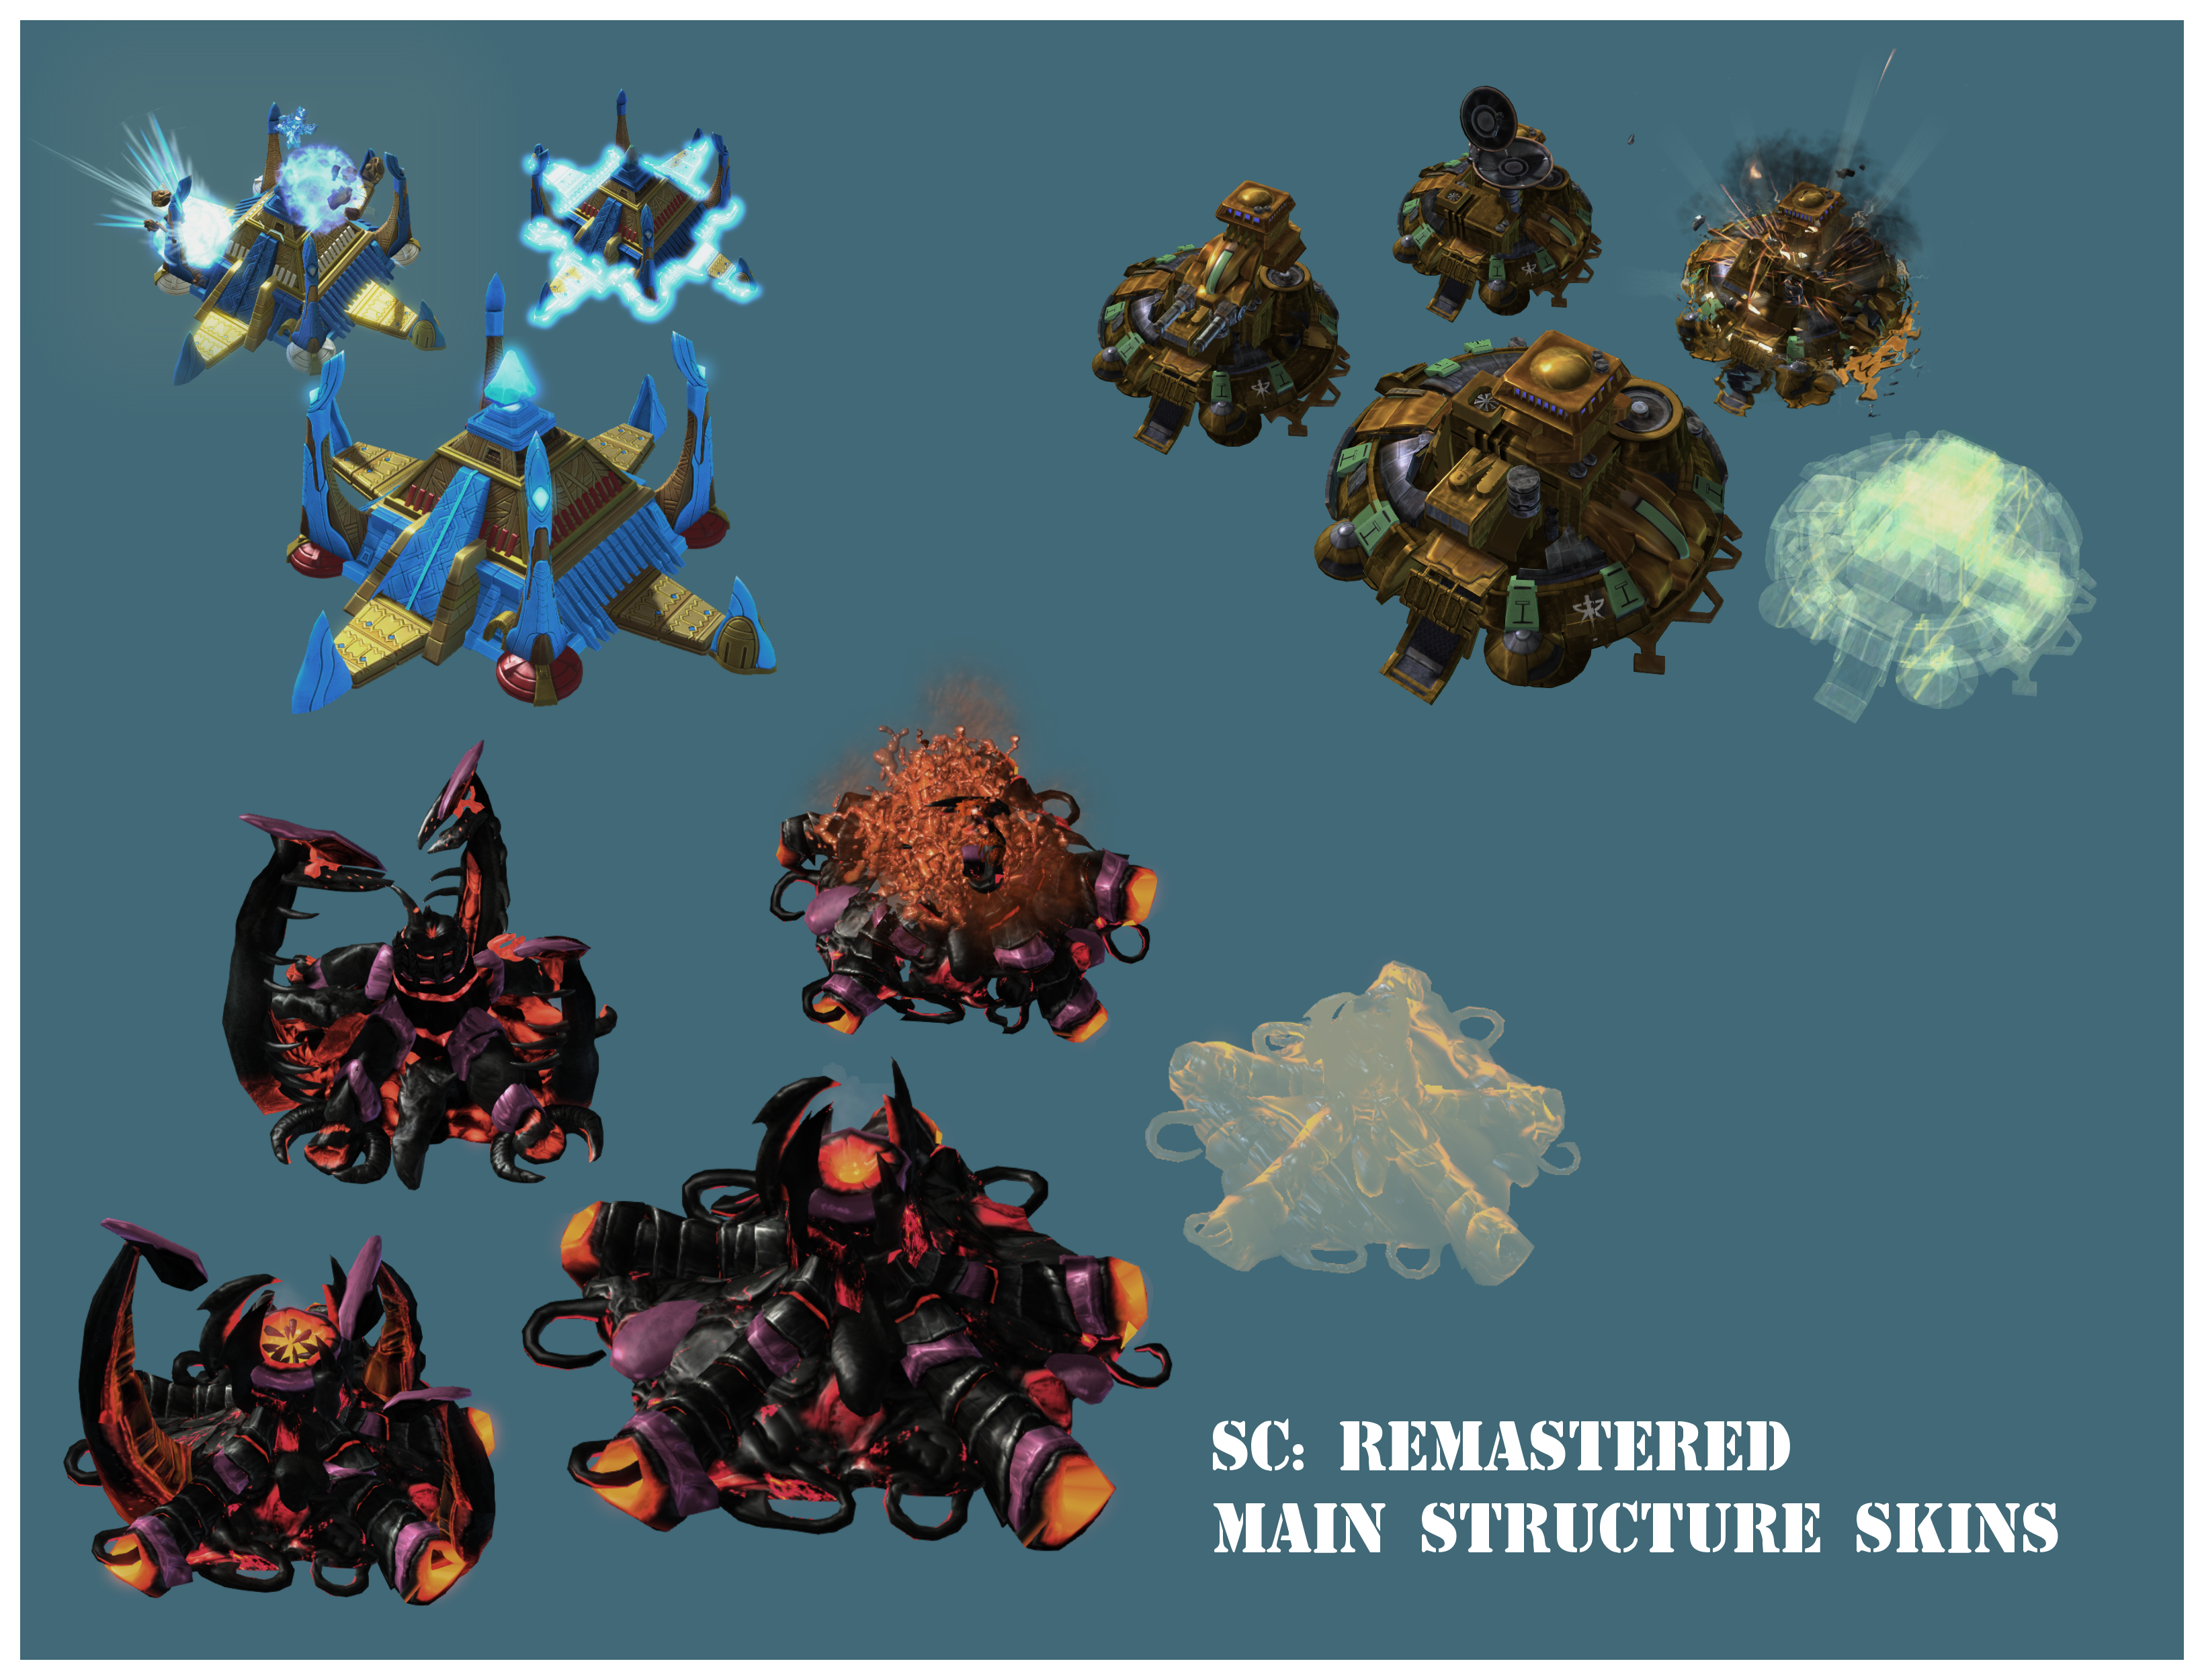 SC: Remastered Structure Skins